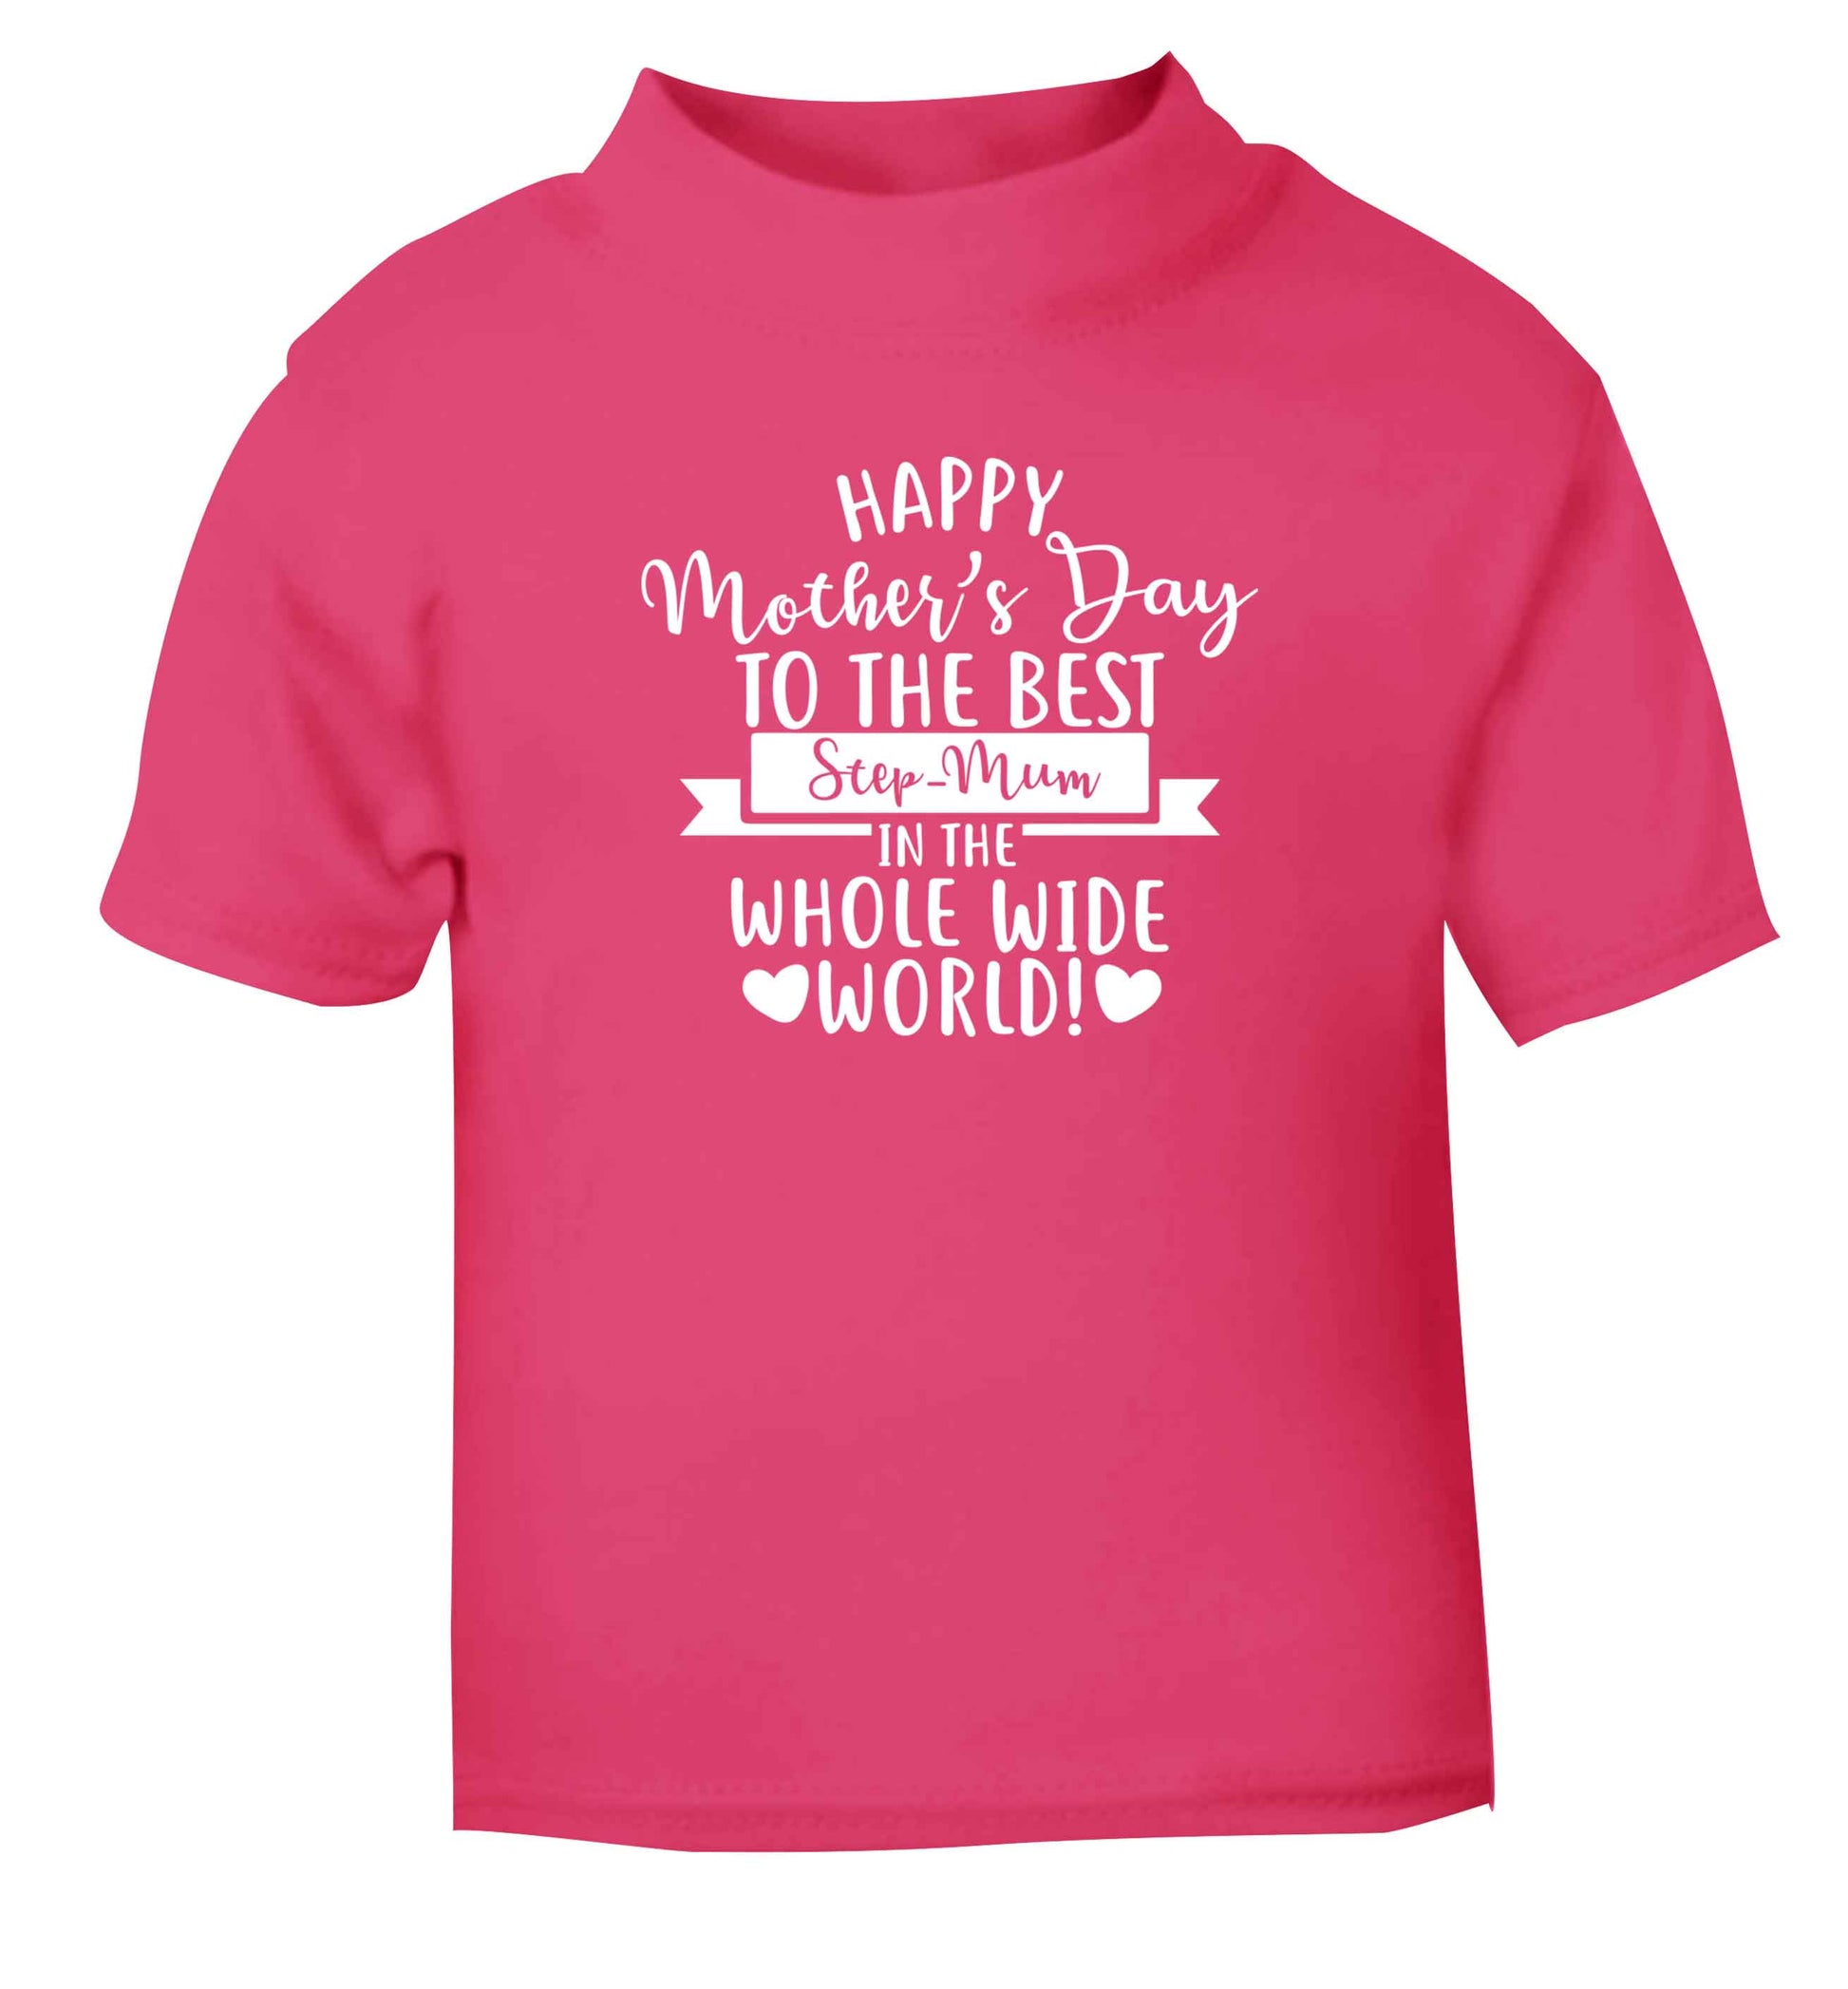 Happy mother's day to the best step-mum in the world pink baby toddler Tshirt 2 Years